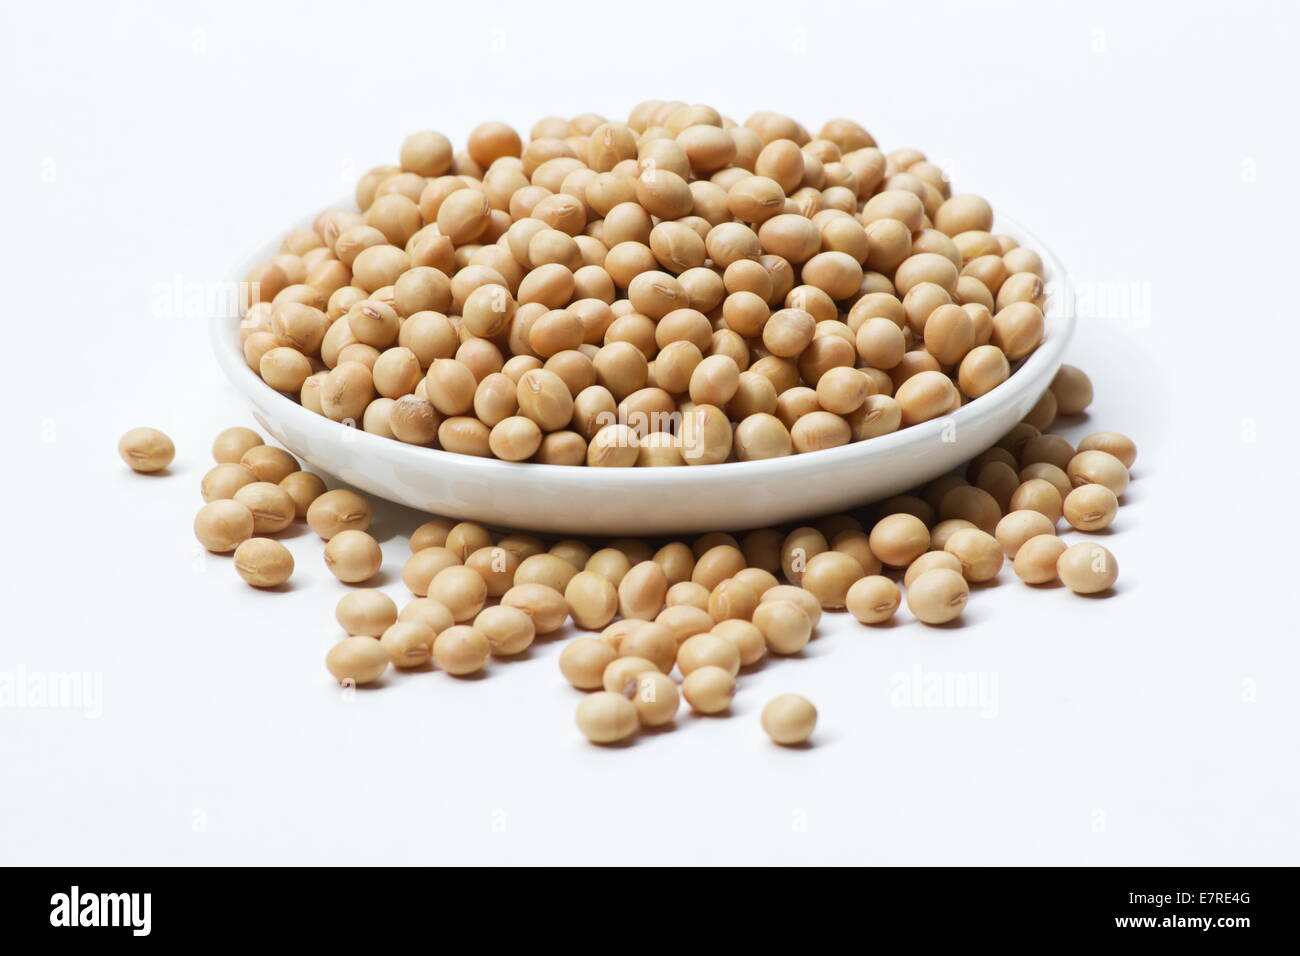 Soybeans (Glycine max)  in a white dish on white background Stock Photo